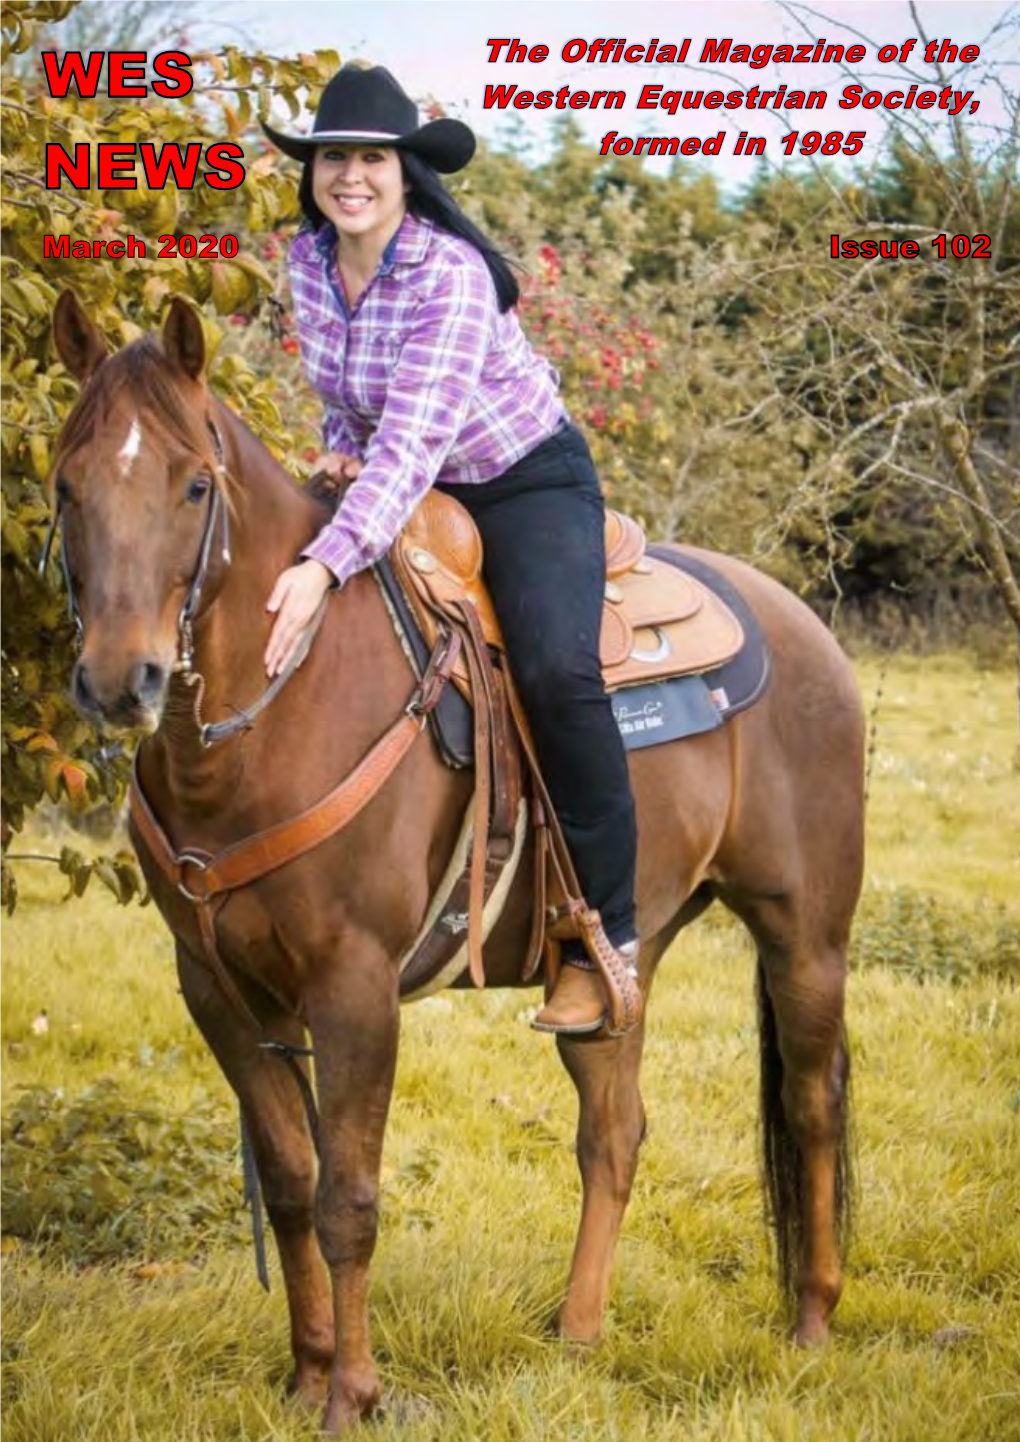 The Western Equestrian Society Area 8 Annual Summer Training Camp: At